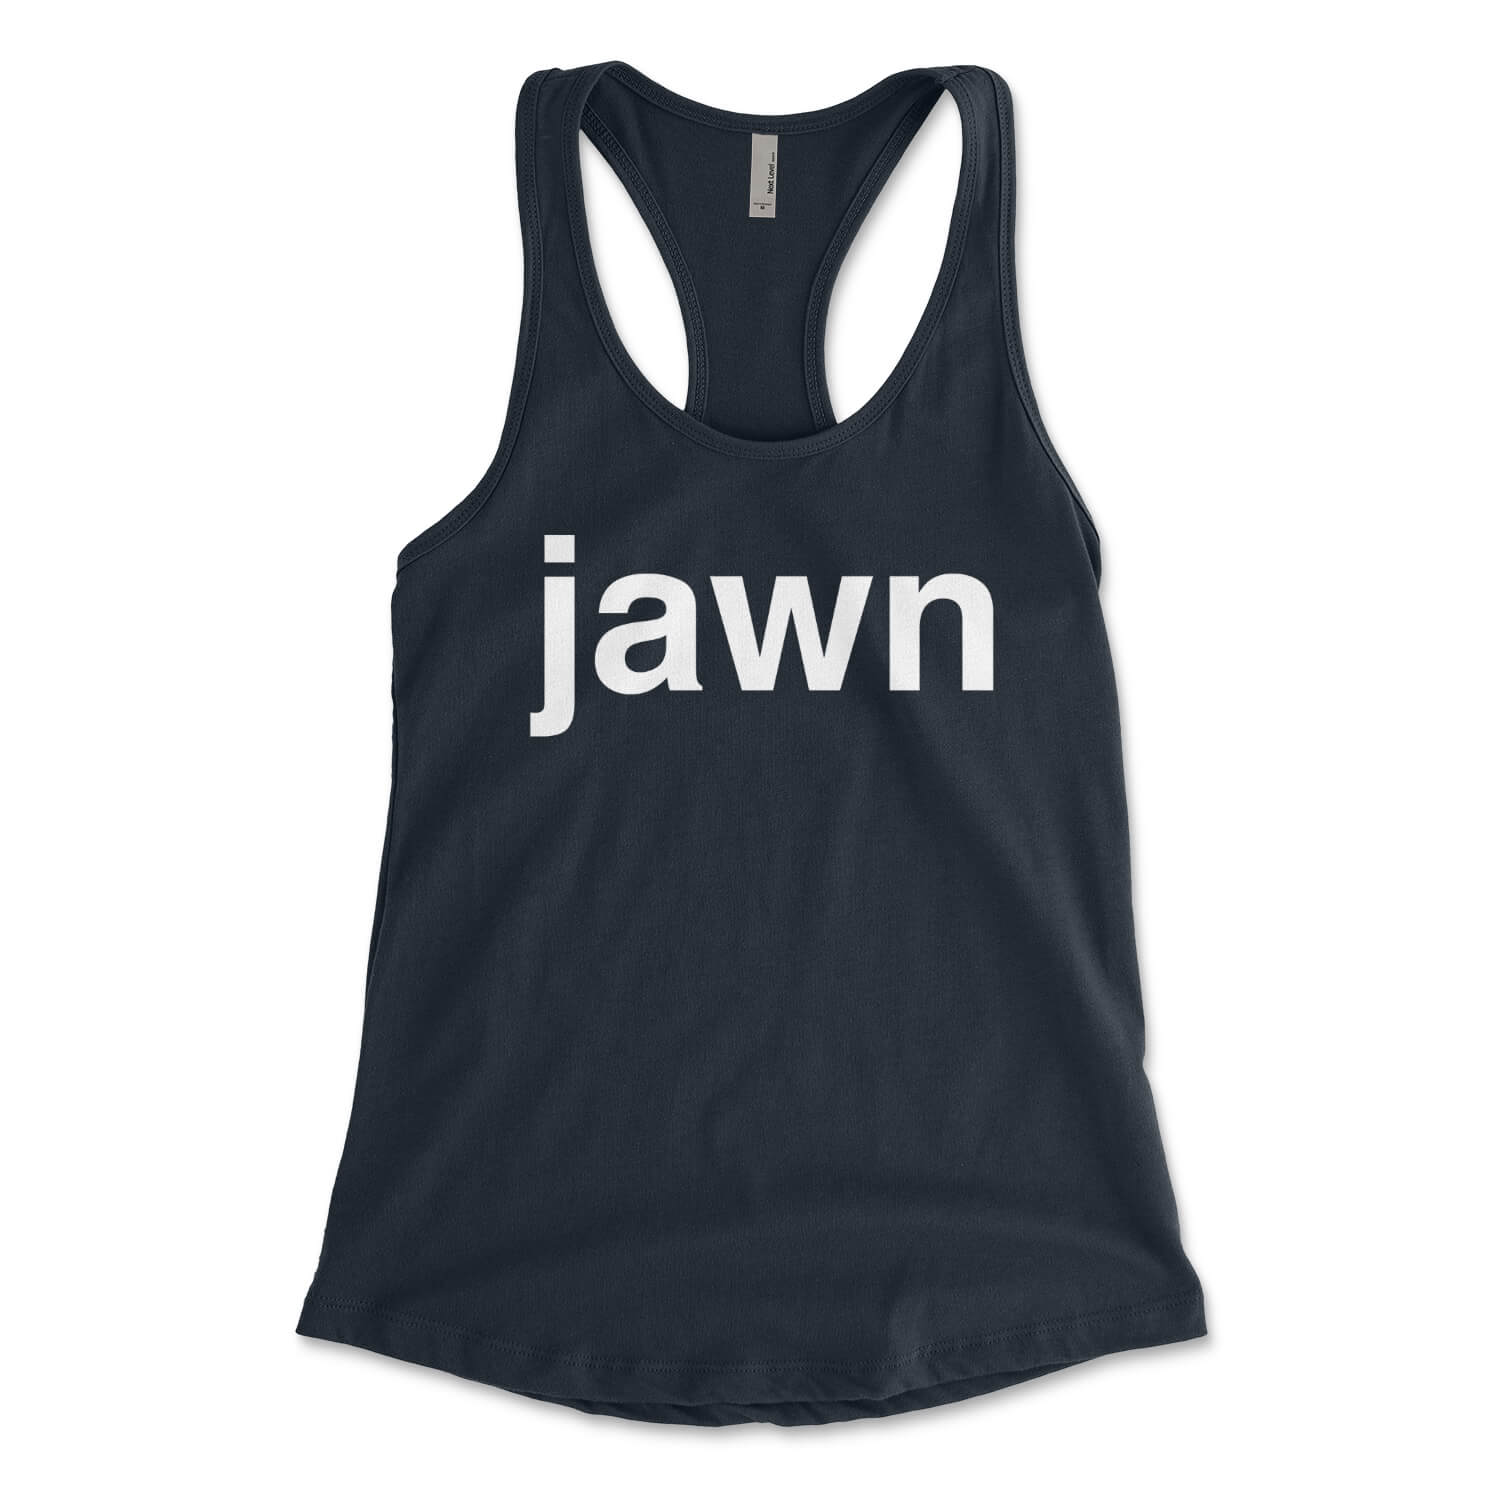 Philadelphia jawn midnight navy blue womens racerback tank top from Phillygoat